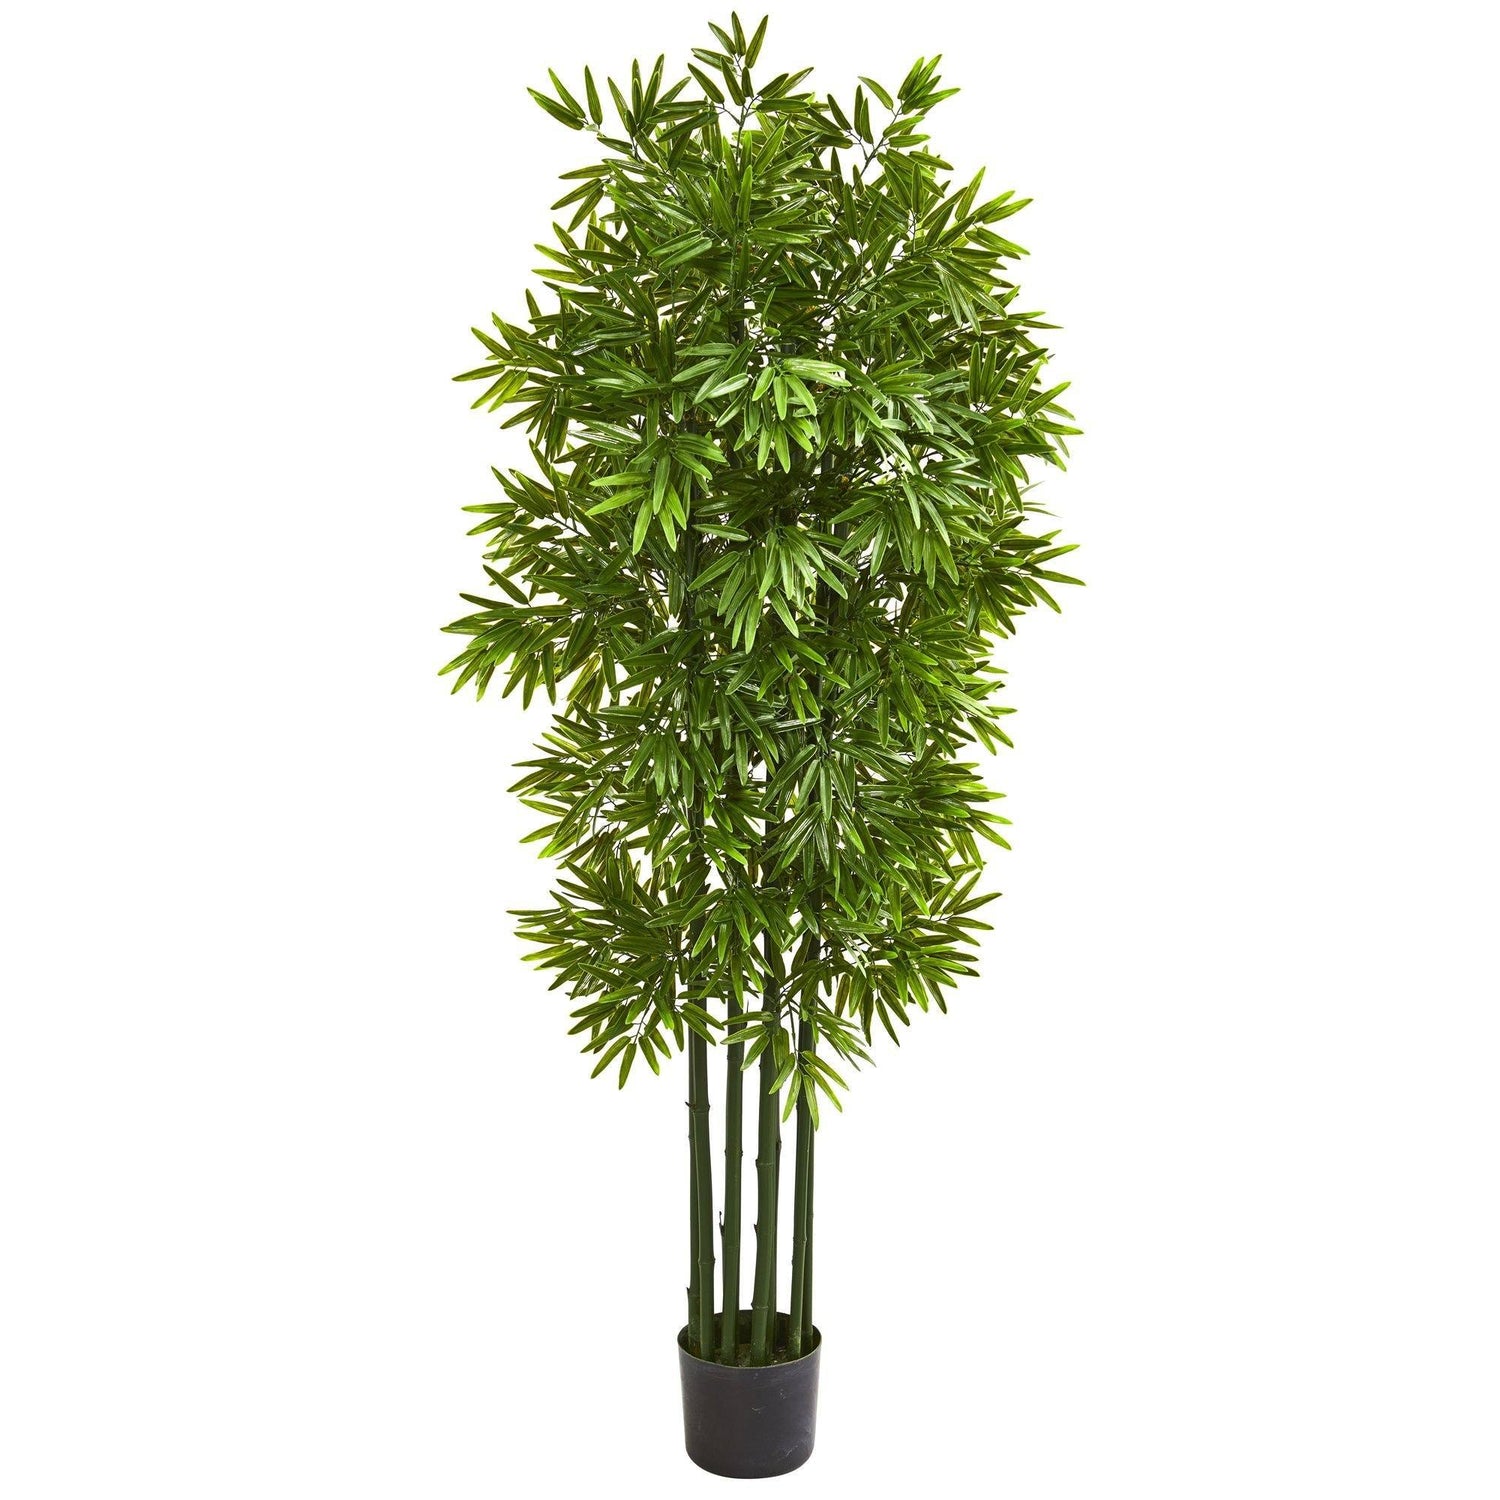 64” Bamboo Artificial Tree with Green Trunks UV Resistant (Indoor/Outdoor)